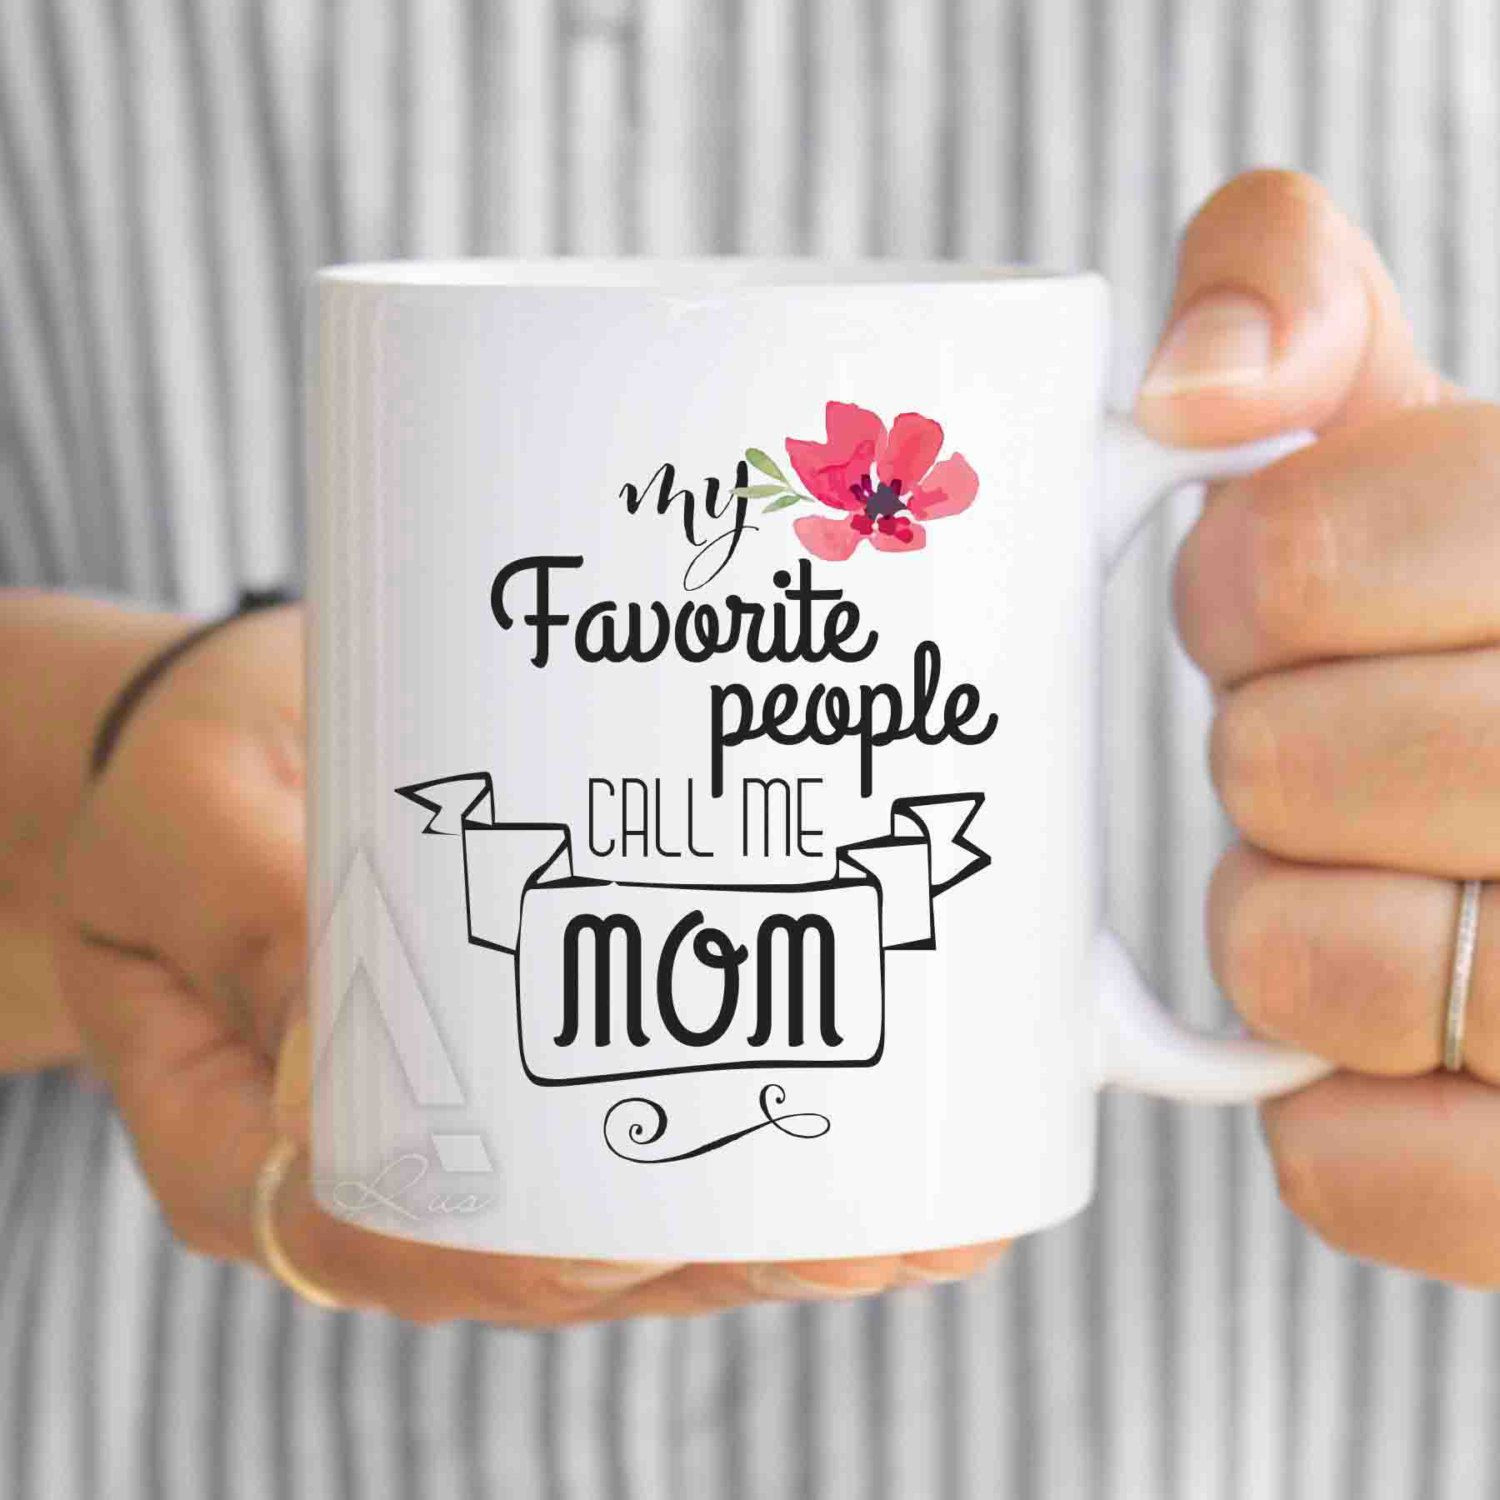 Birthday Gift Ideas For Mom From Son
 christmas ts for mom mom son t "My favorite people